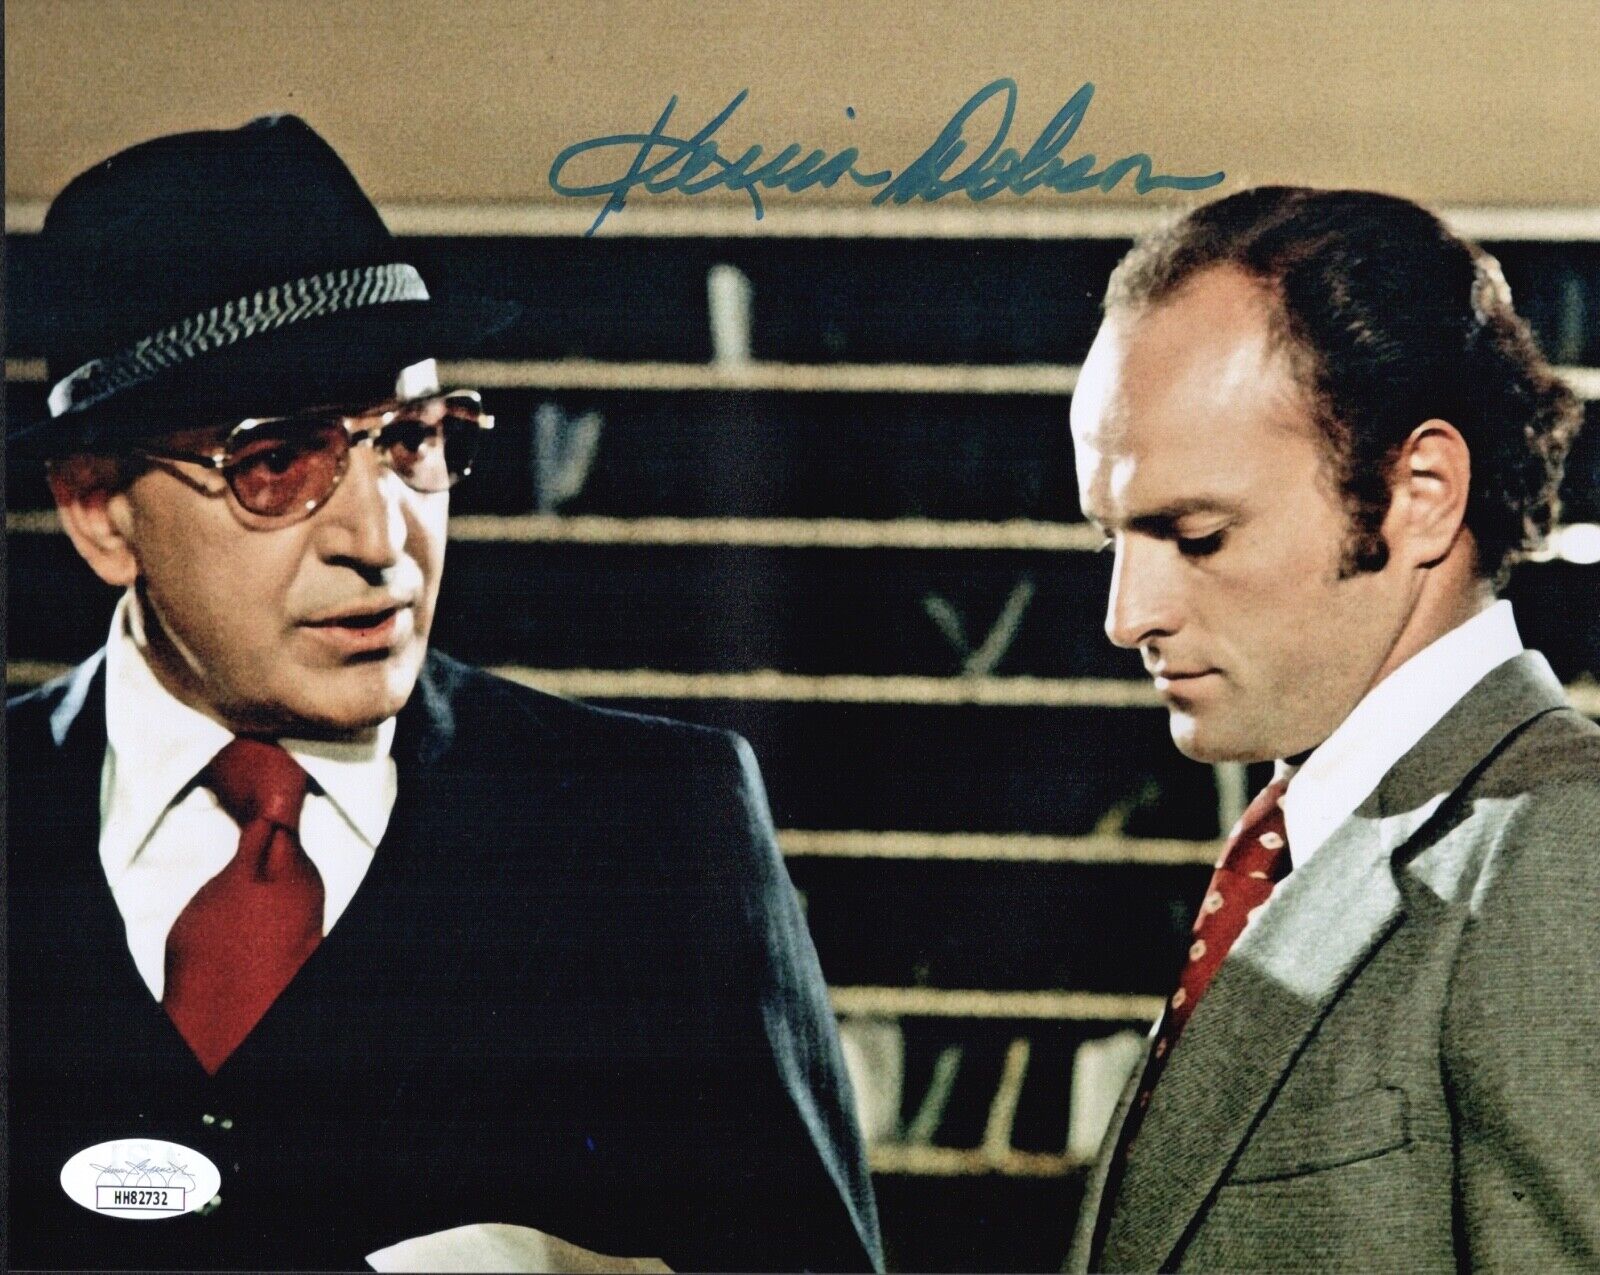 KEVIN DOBSON Signed KOJAK 8x10 Photo Poster painting In Person Autograph JSA COA Cert